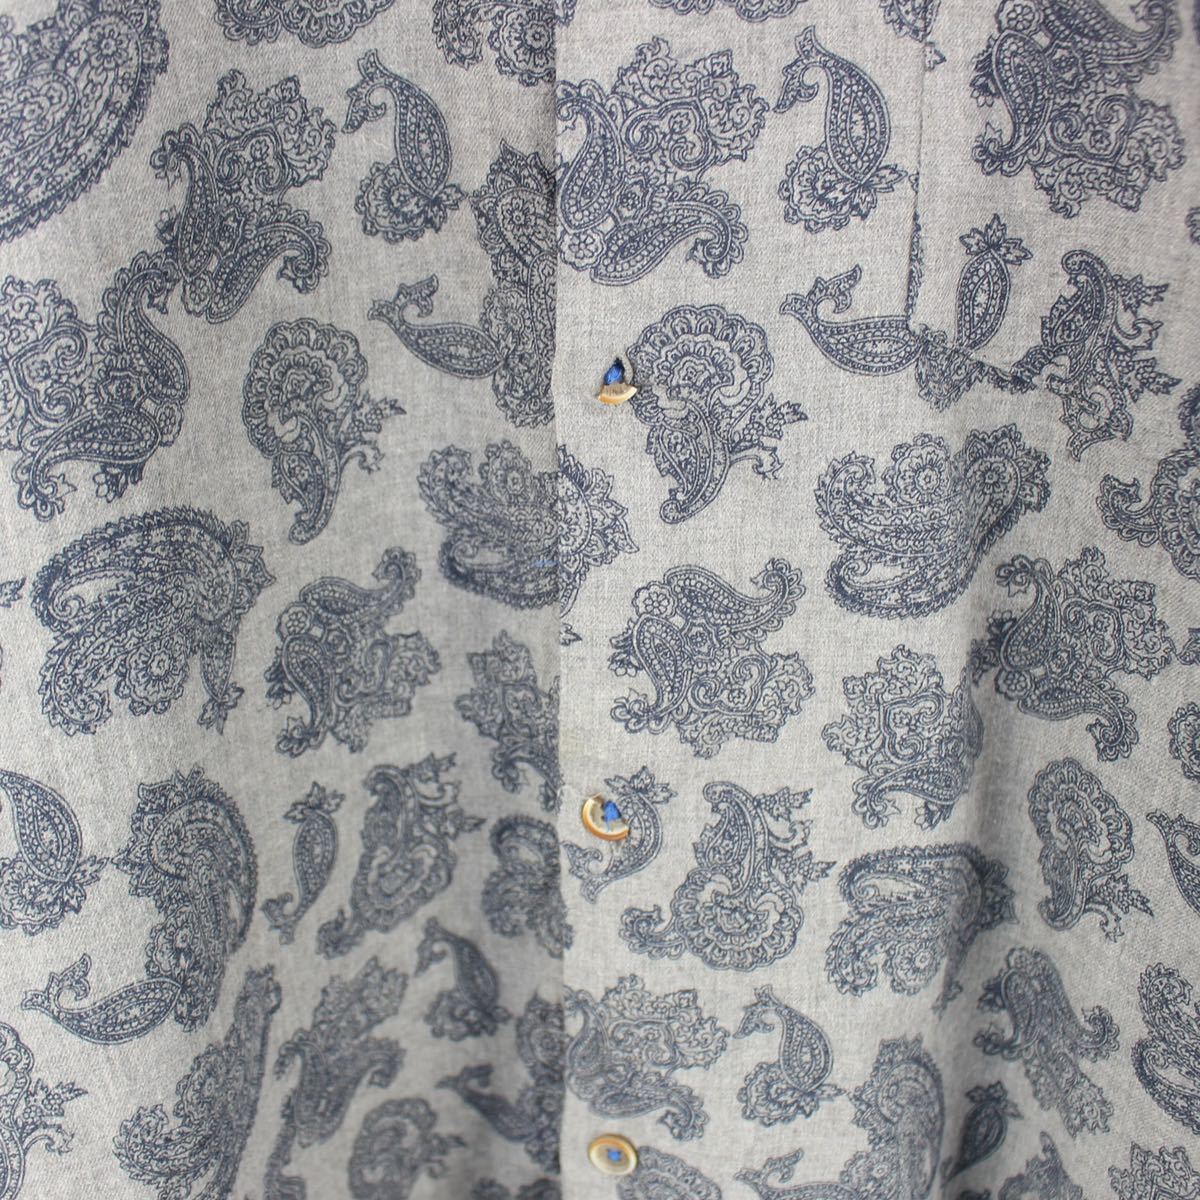 USA VINTAGE PAISLEY PATTERNED LONG SLEEVE SHIRT/アメリカ古着ペイズリー柄長袖シャツ_画像6